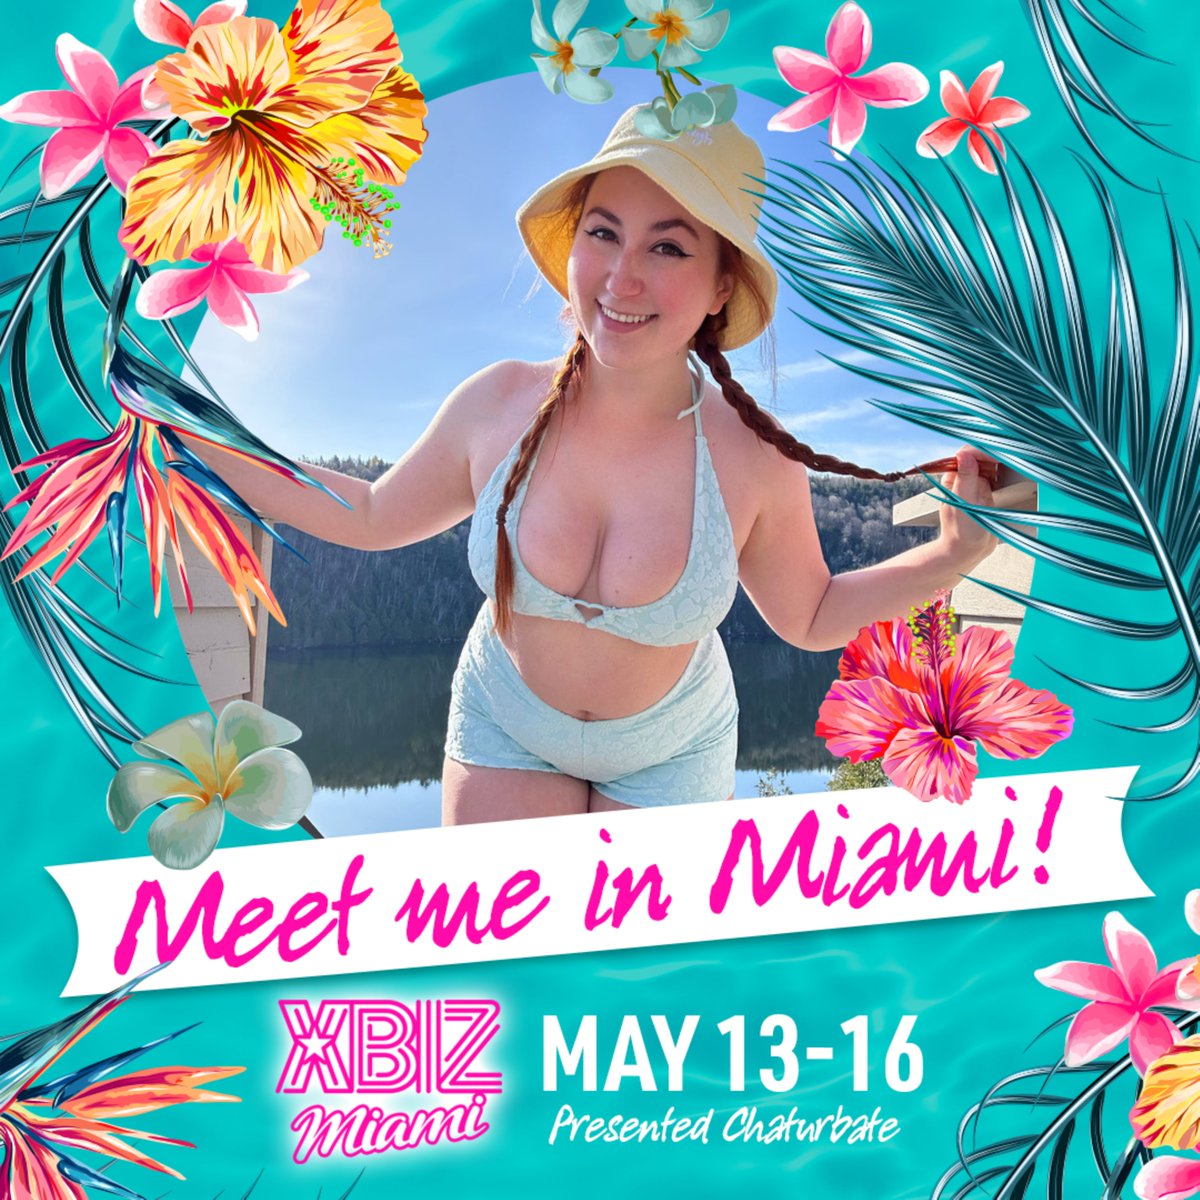 Who else is going to @XBIZ 😎🙌🏻 So excited I bought too many bikinis!!